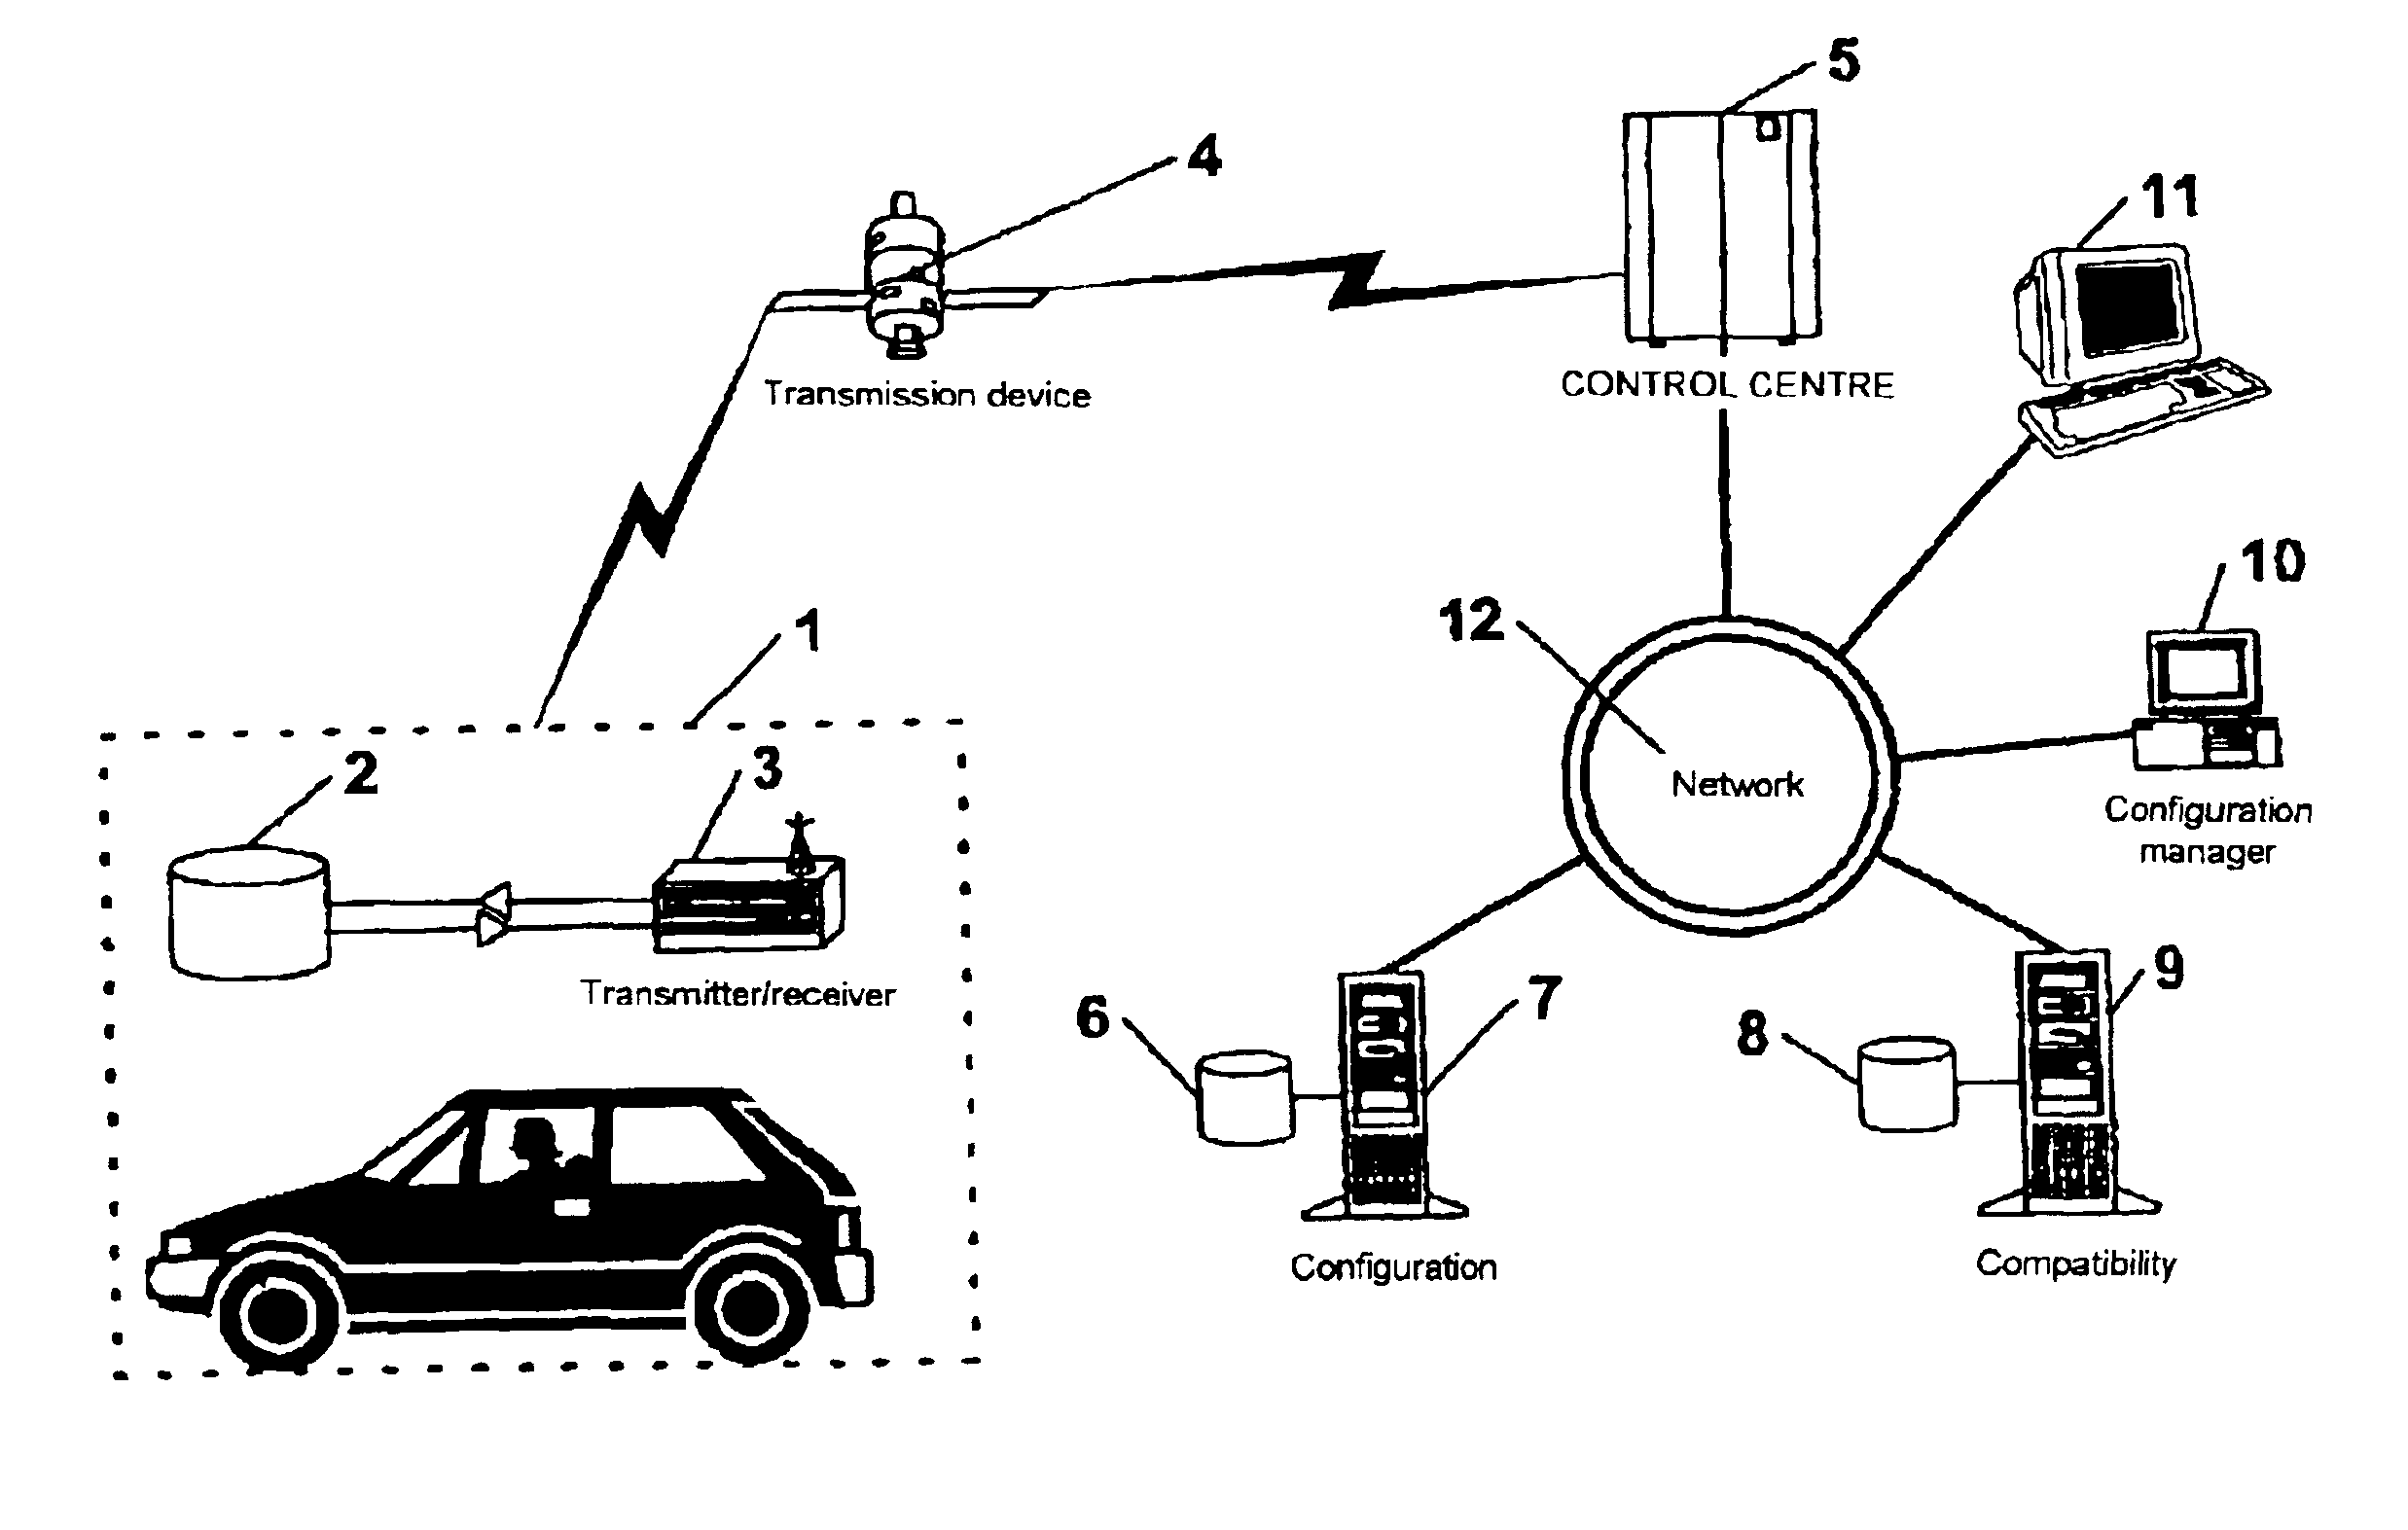 Method for documentation of data for a vehicle